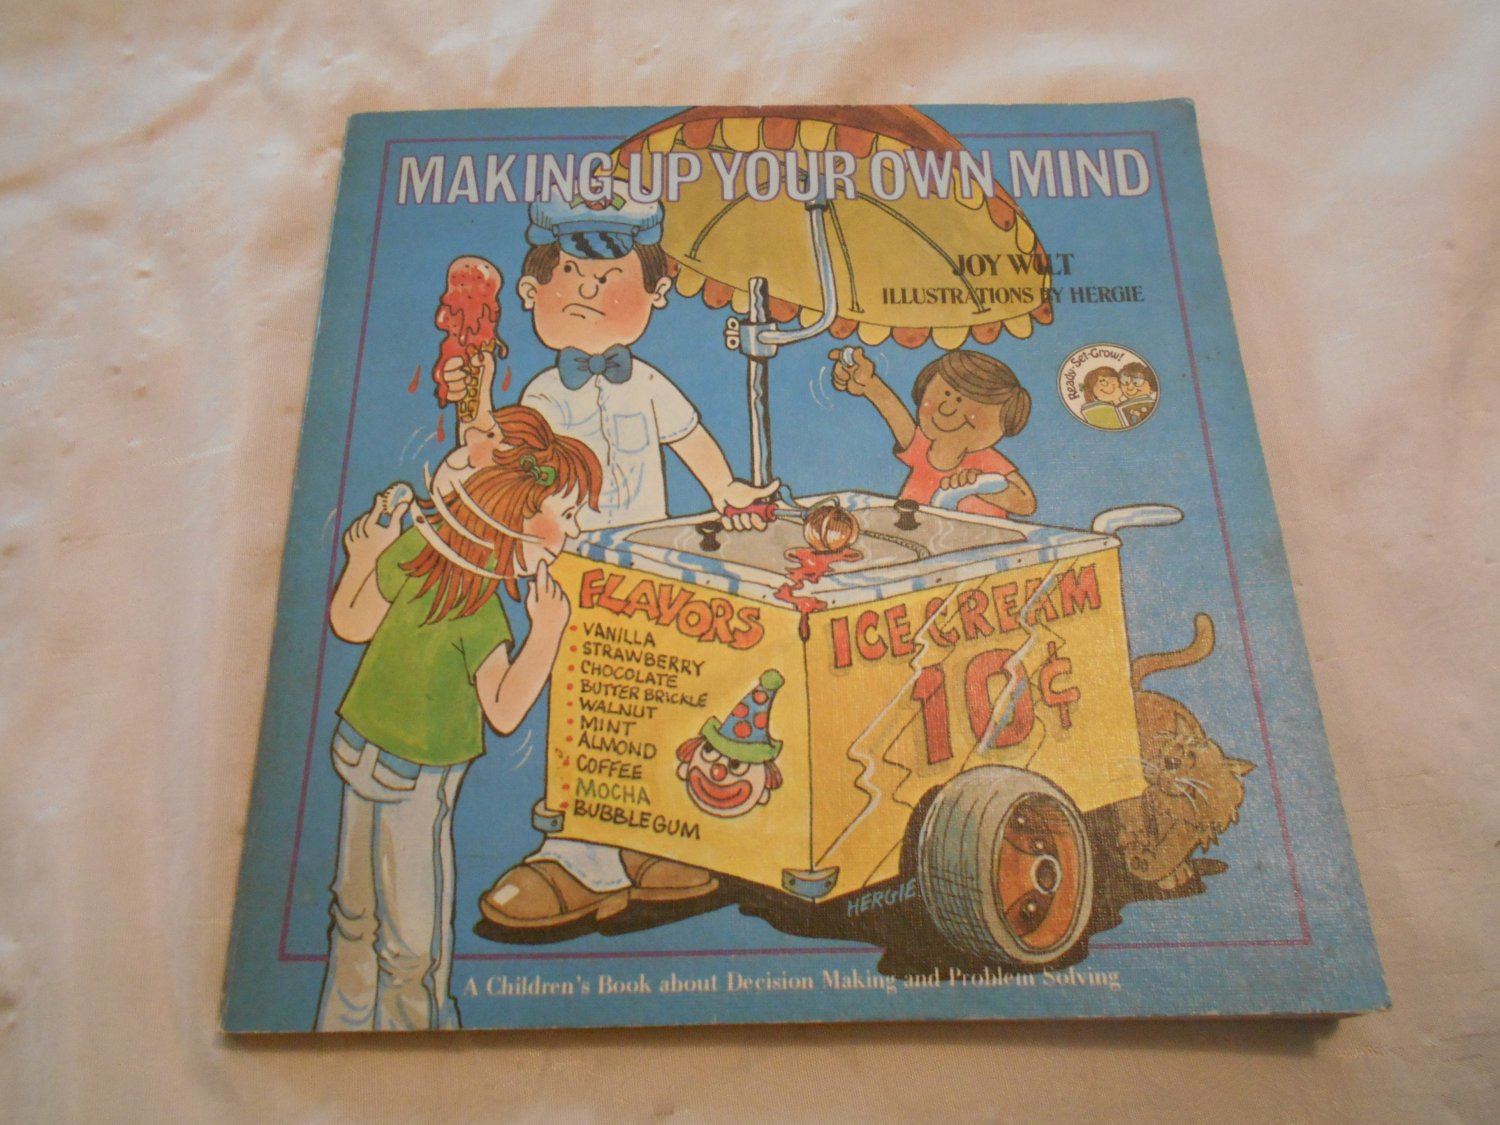 Making Up Your Own Mind by Joy Wilt (1979) (CL45) Ready Set Grow Series